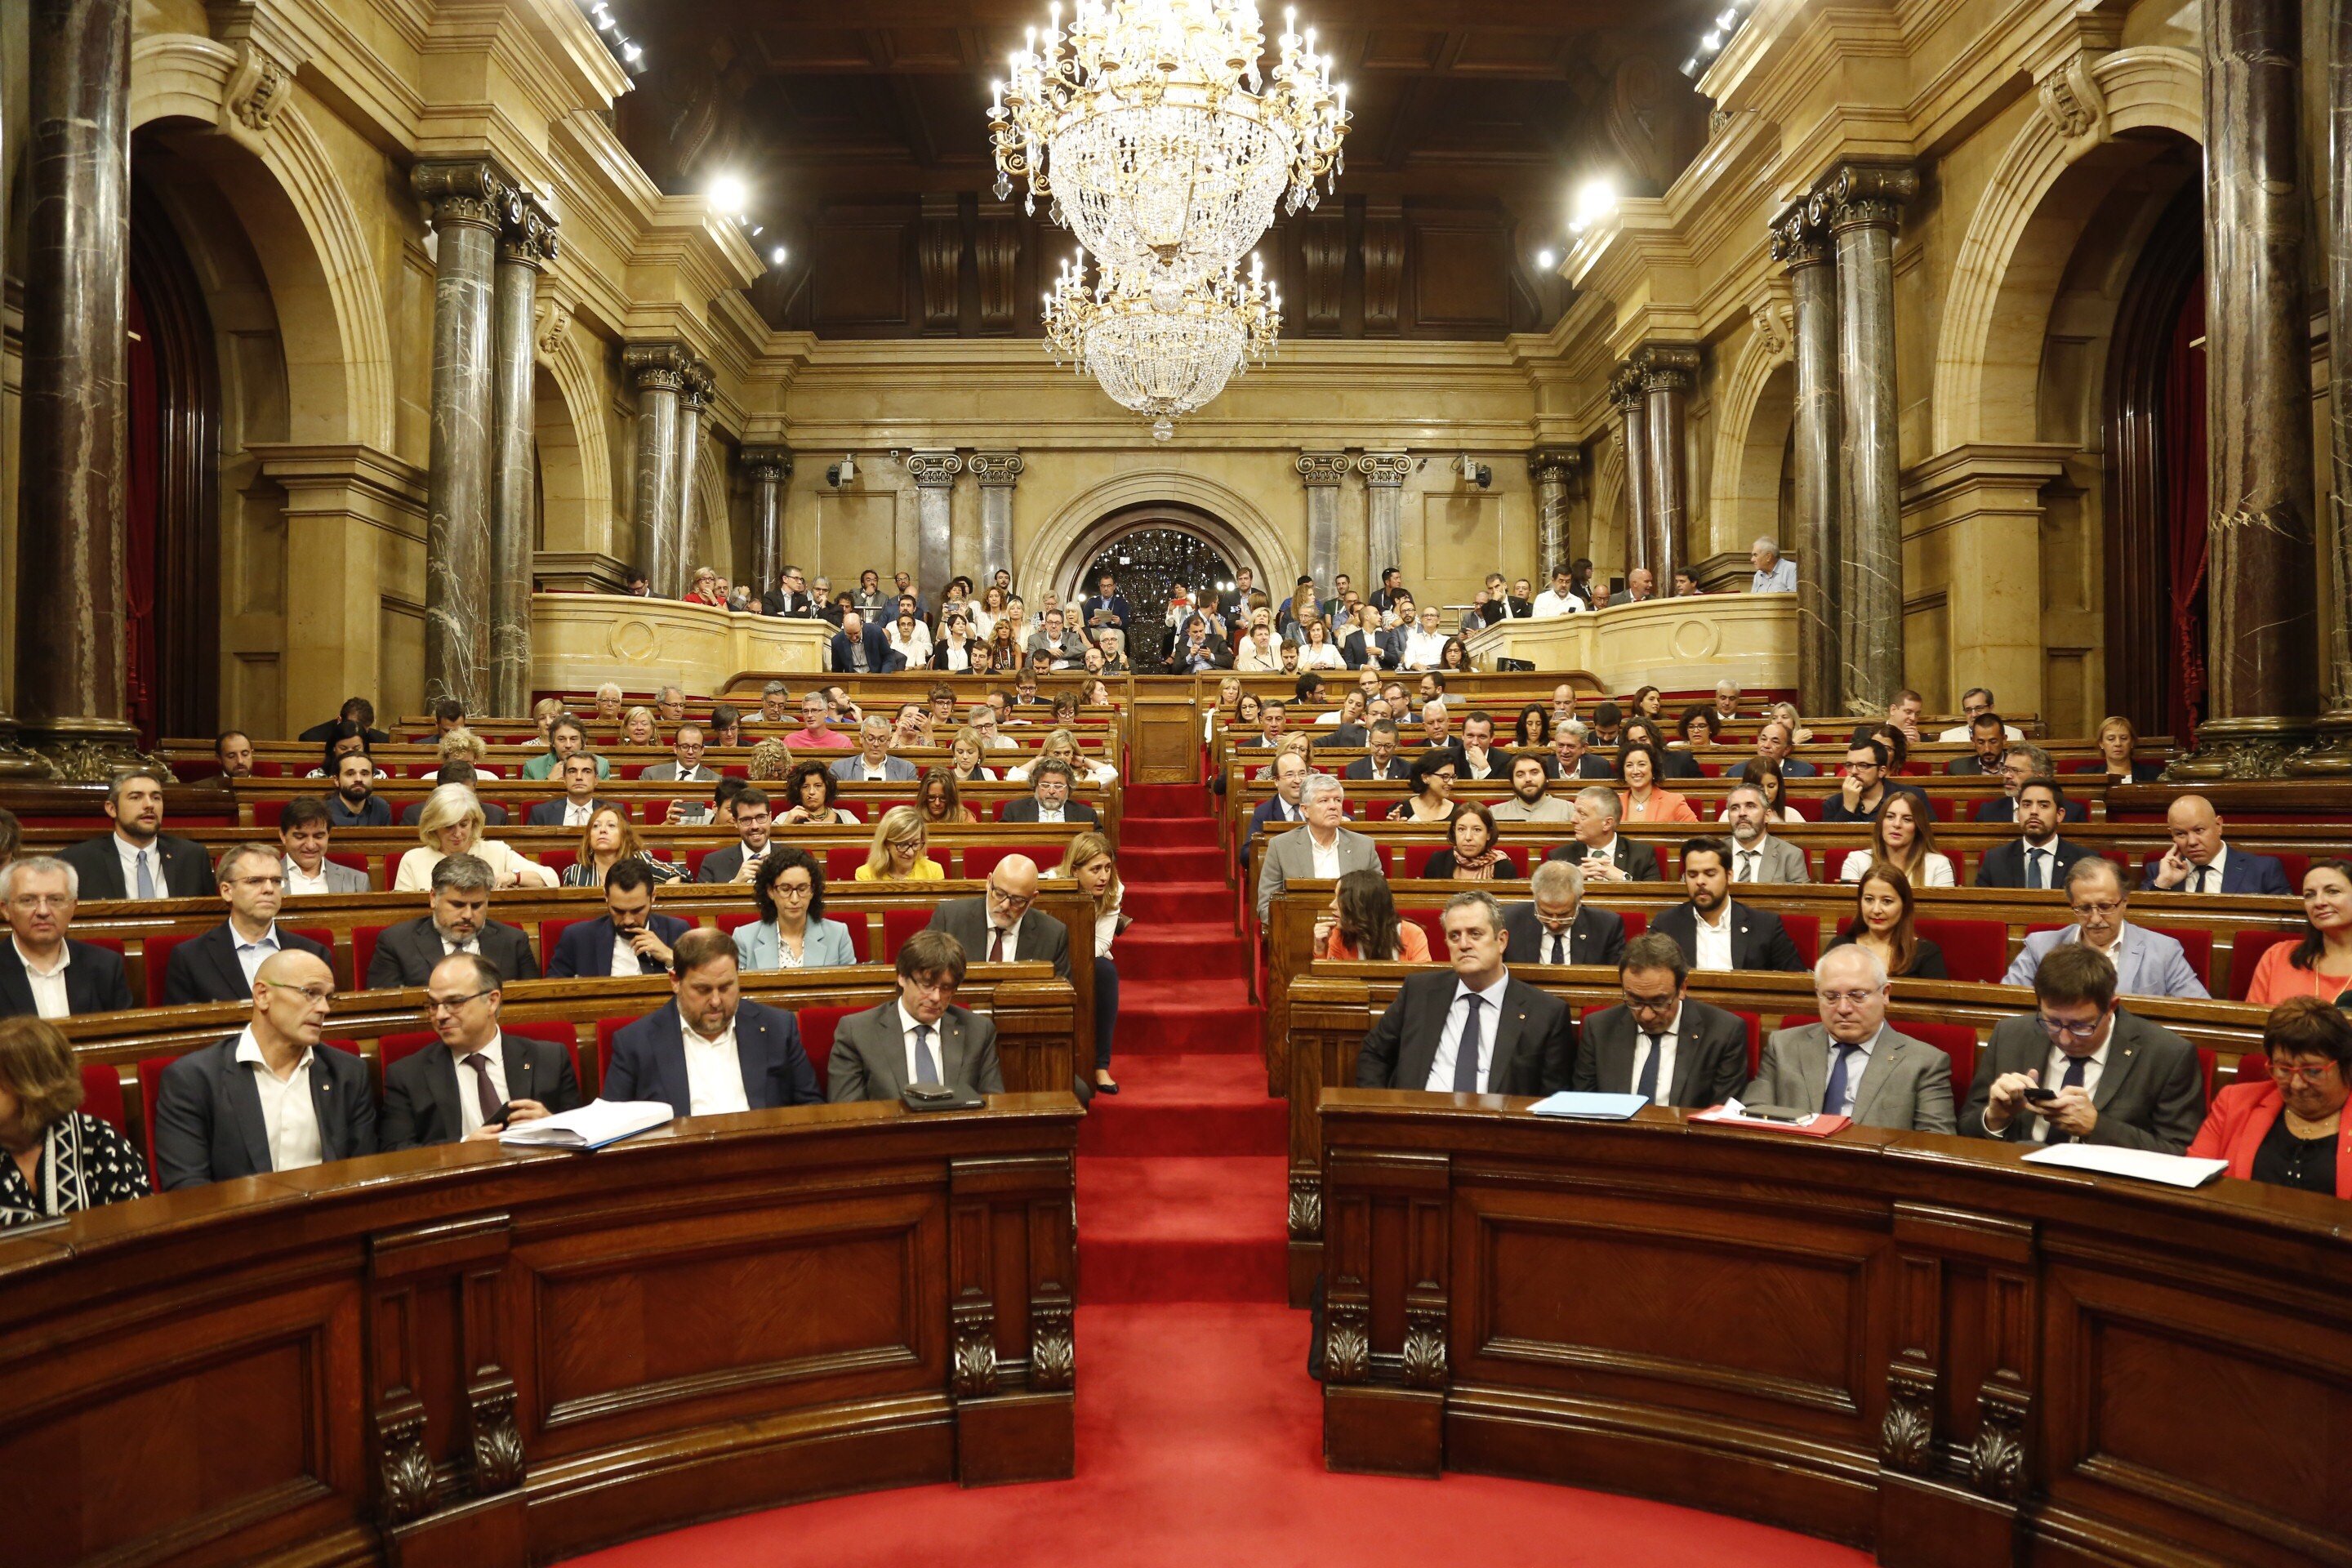 Negotiations to invest new Catalan president interrupted